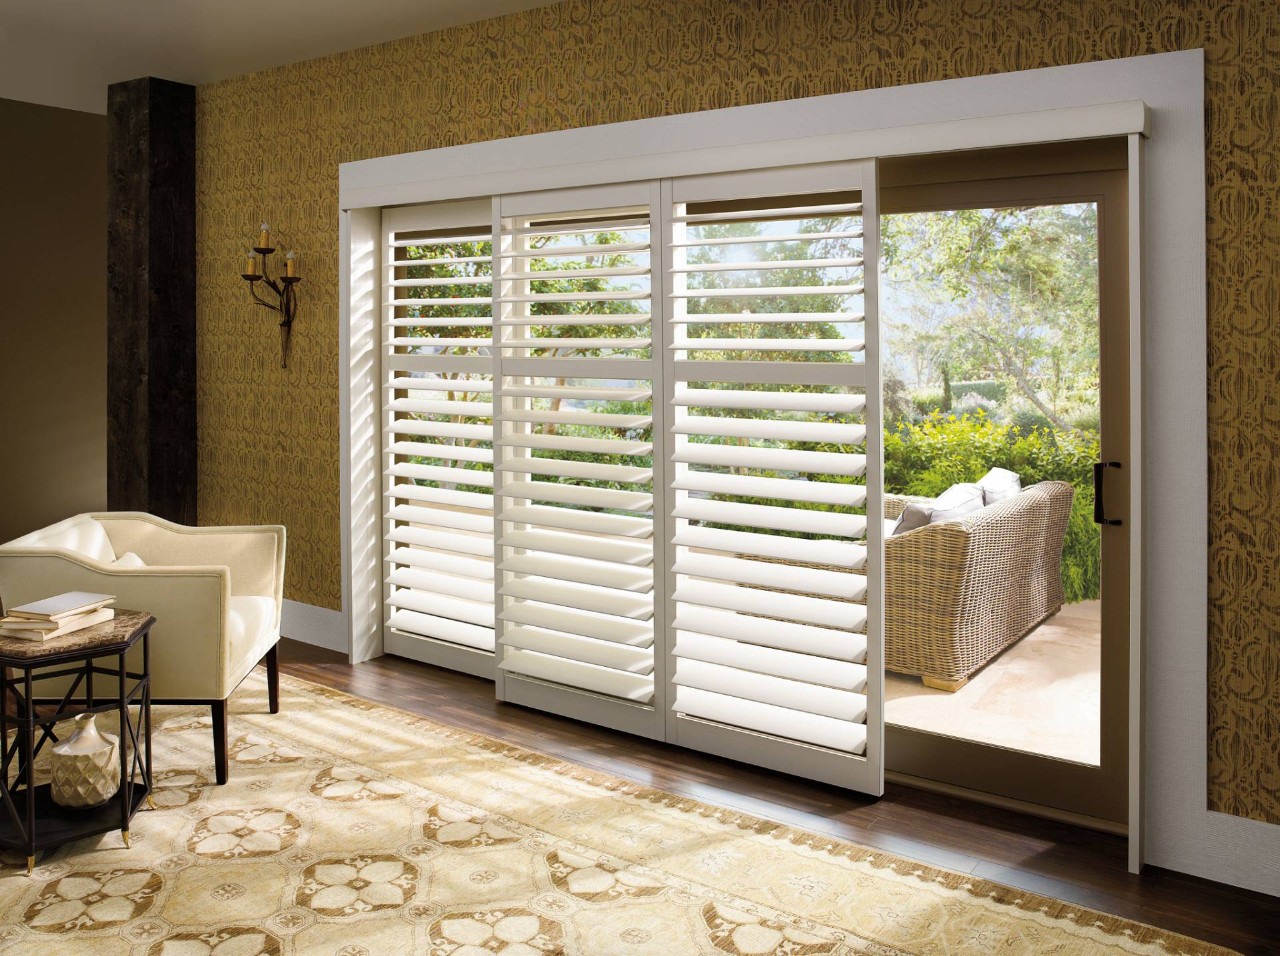 Hunter Douglas shutters filtering in light during the day at a home near Venice, FL